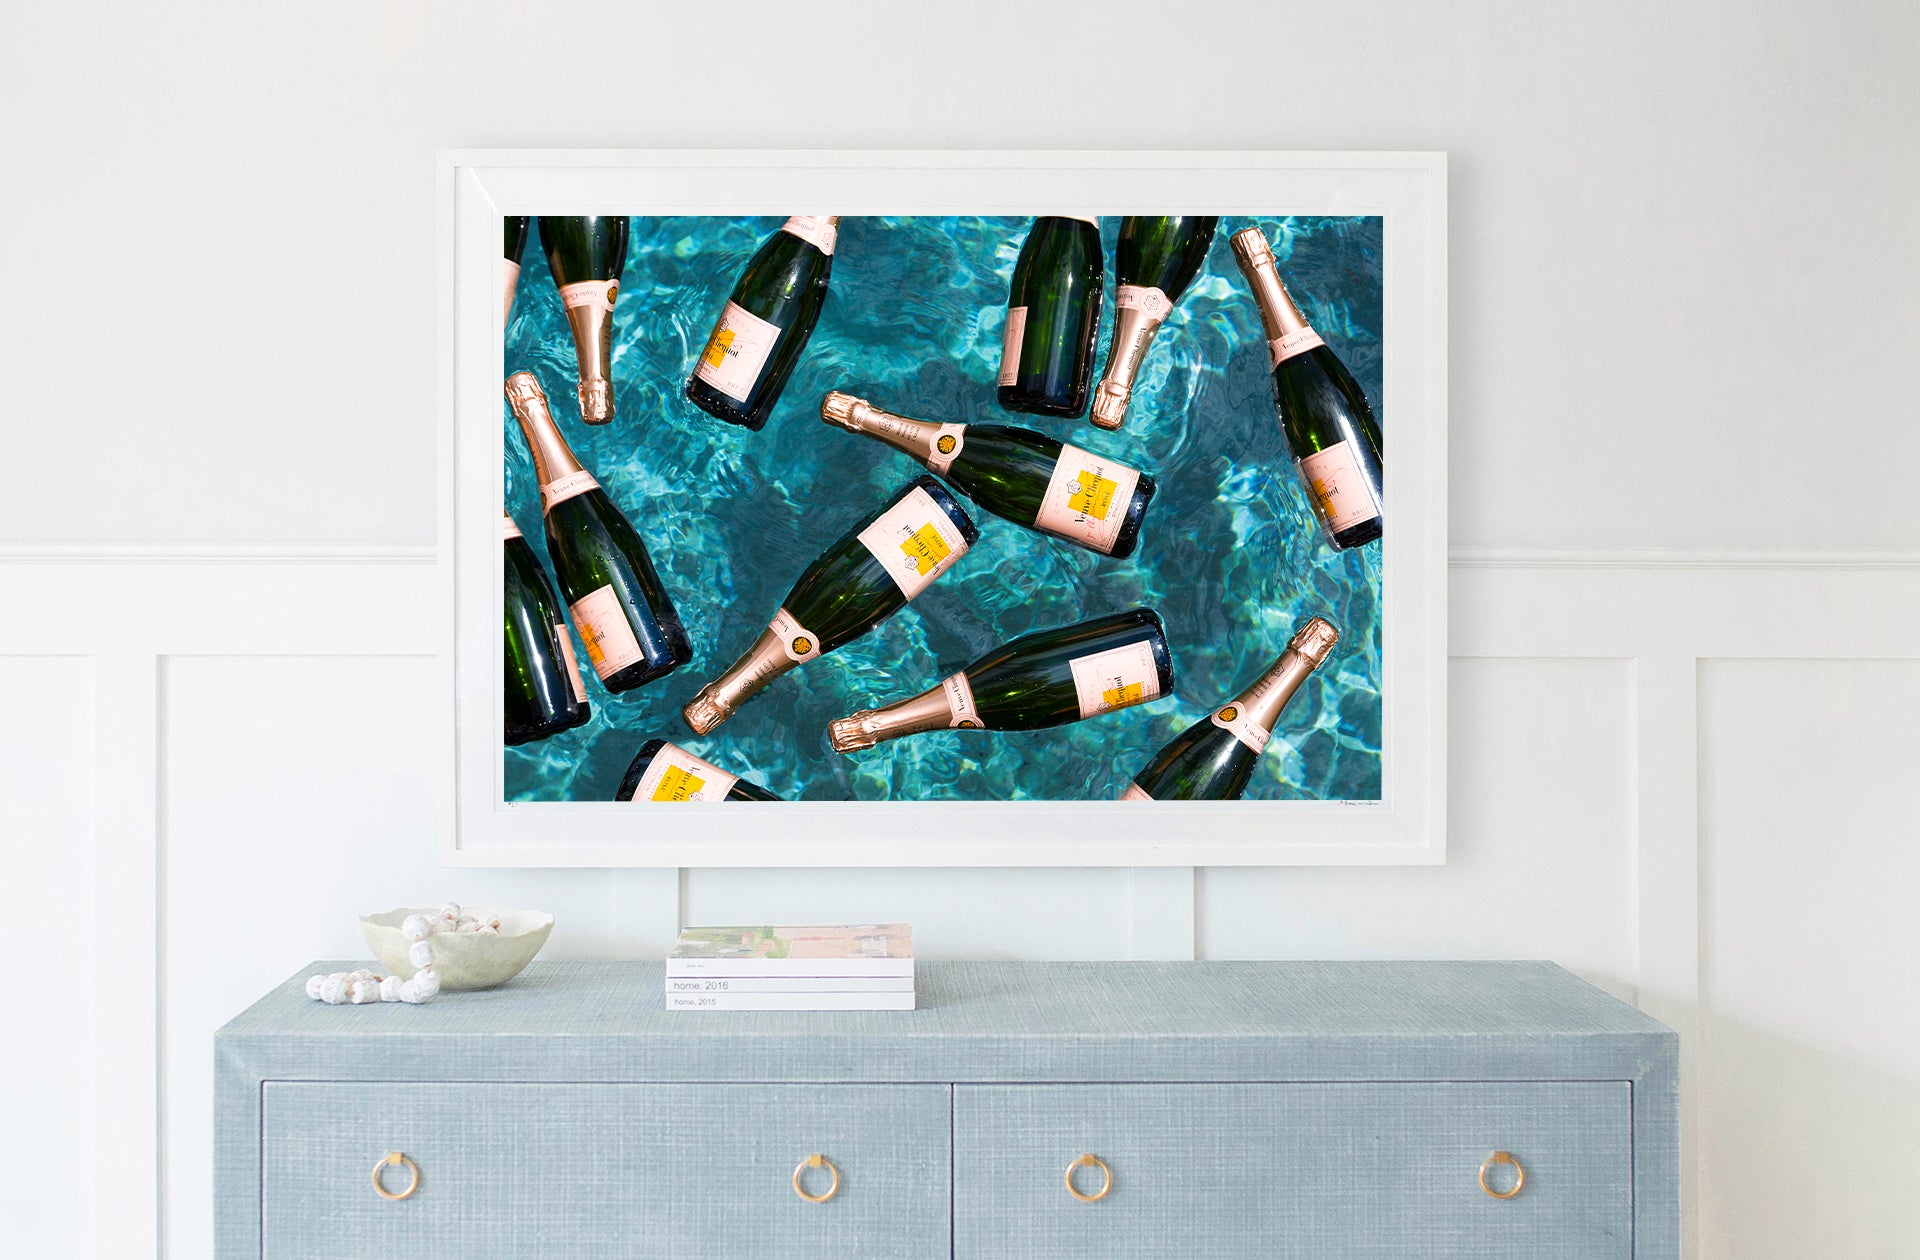 RARE VEUVE CLICQUOT ADVERTISING MAIL DISPLAY POP-UP 2014 PRIORITY  #CLICQUOTMAIL